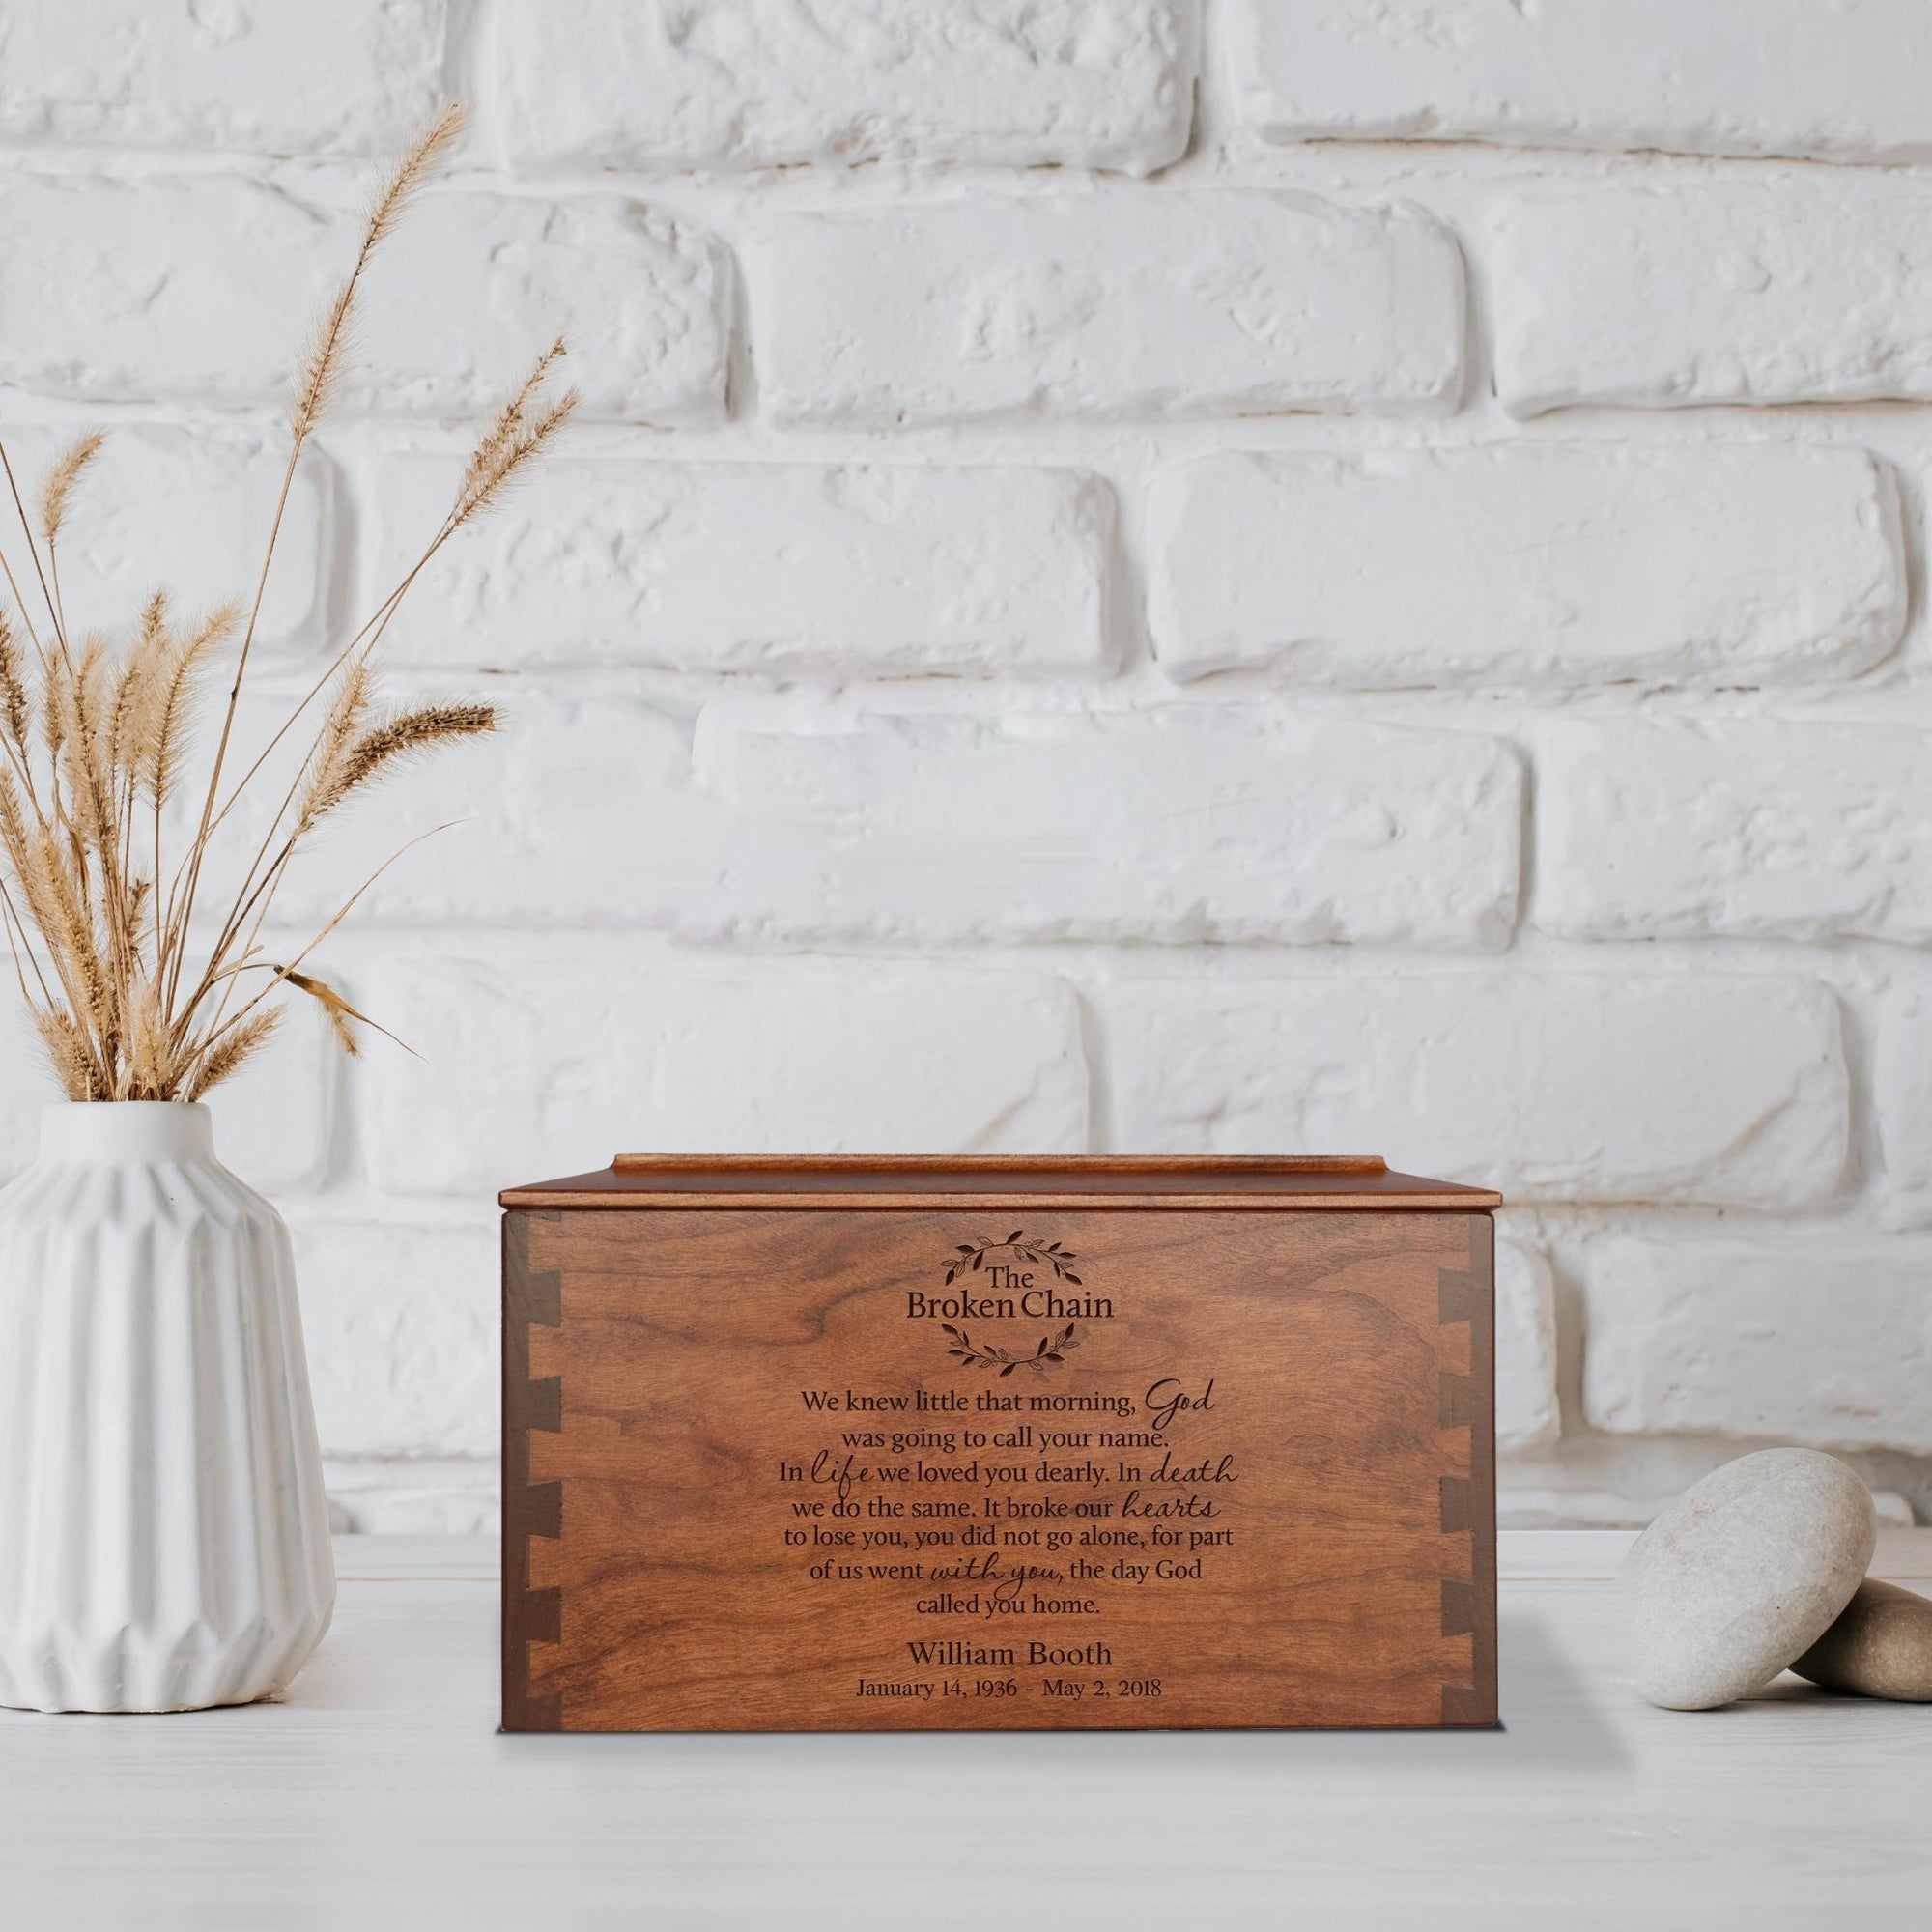 Custom Wooden Cremation Urn Box Large for Human Ashes holds 291 cu in The Broken Chain - LifeSong Milestones